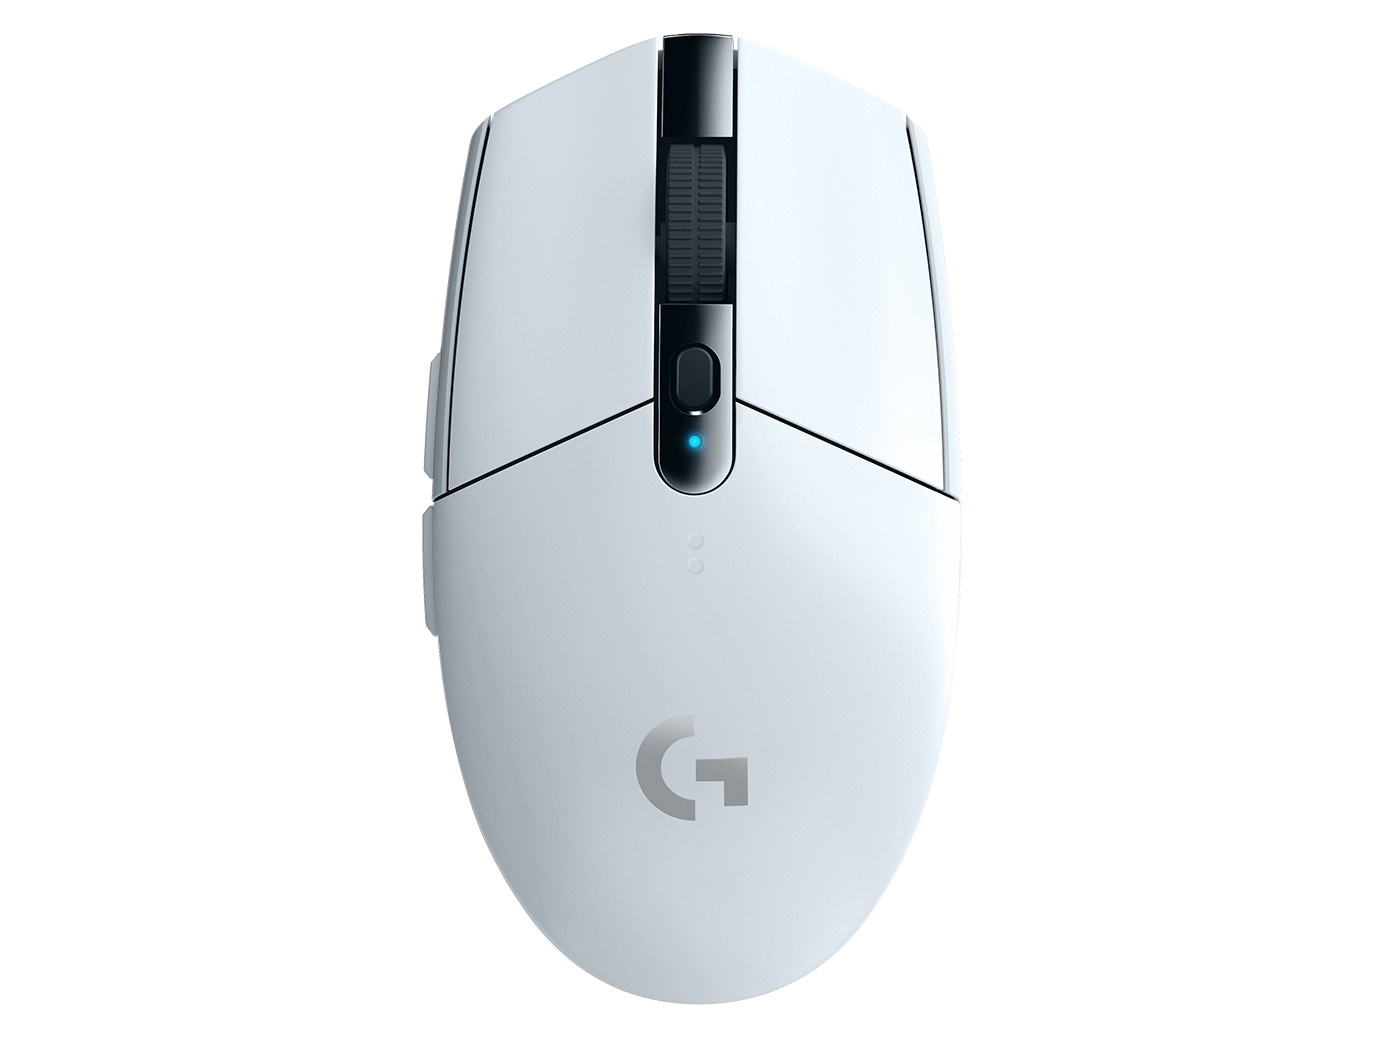 Logitech Gaming Mouse G305 Lightspeed Wireless, High-speed, Hero Gaming Sensor, 6 Programmable buttons, 200-12000 dpi, 1ms report rate, White